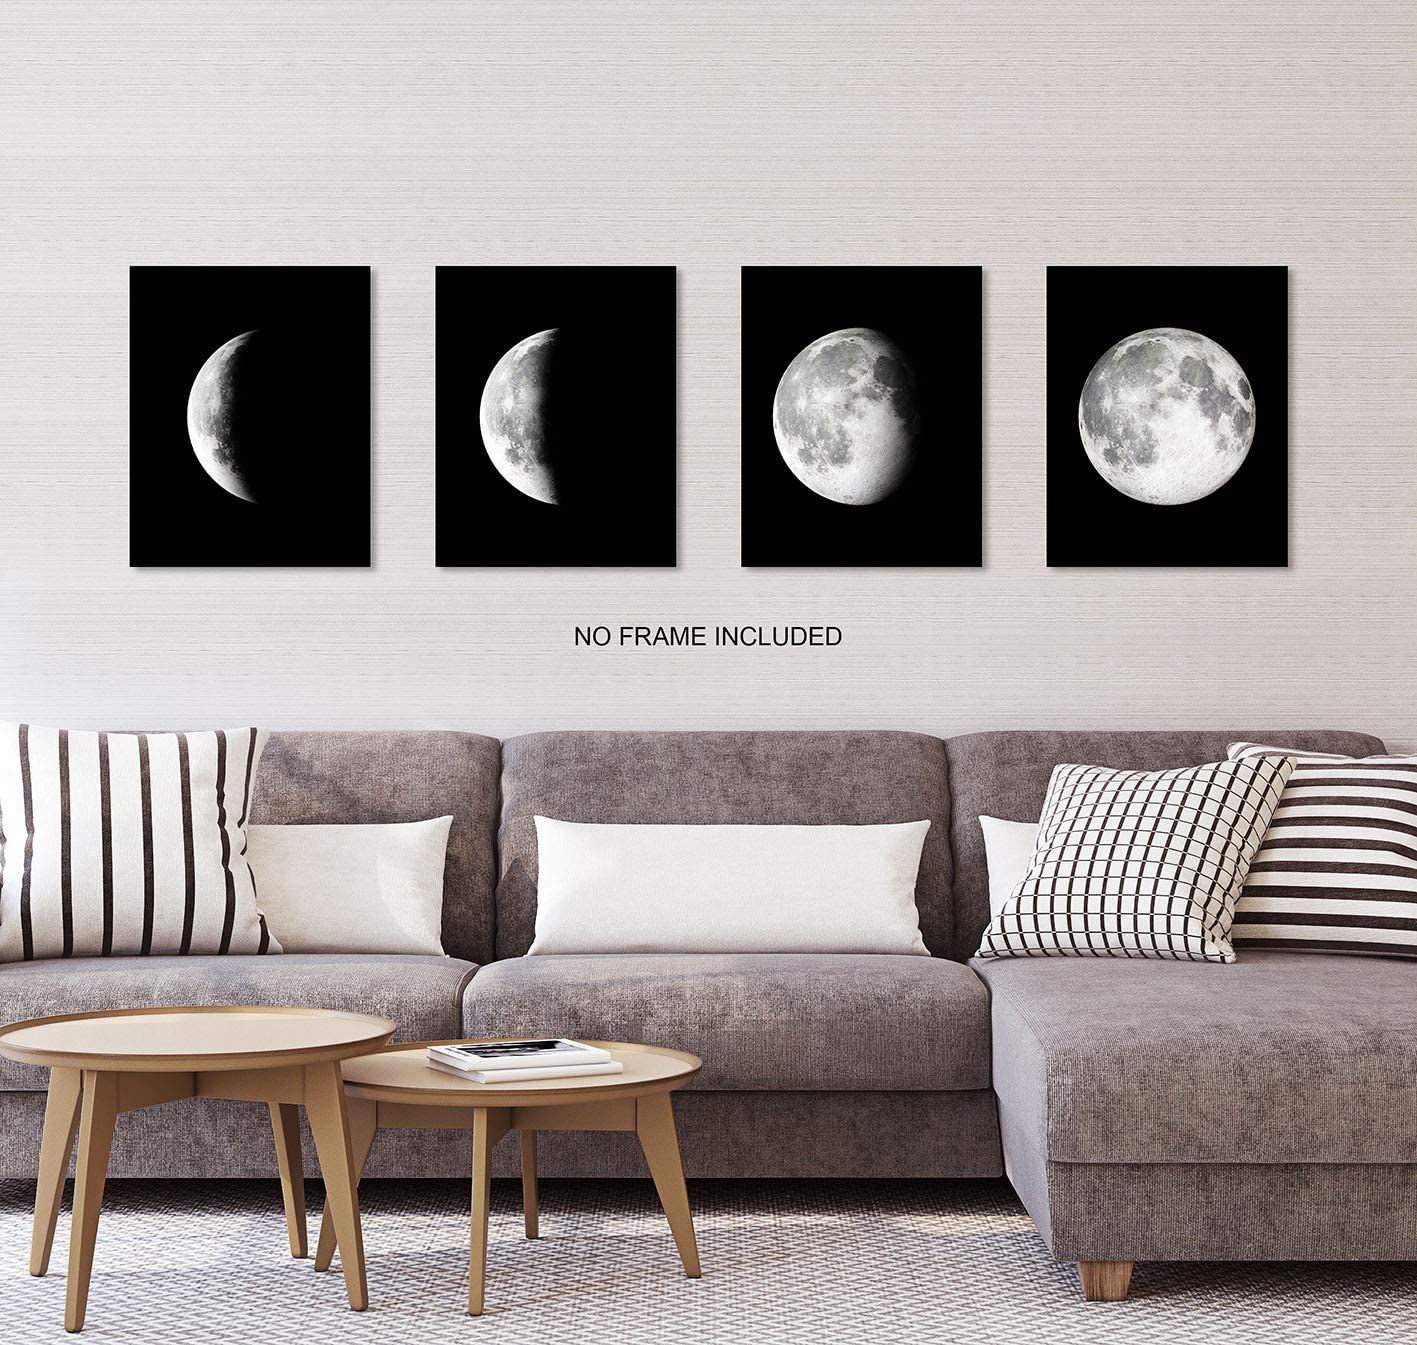 Moon Wall Art, Black and White Wall Art, Bedroom Wall Decor, Living Room wall Décor, Wall Art for Home Office (Set of 4, 8X10in, Unframed Item ships